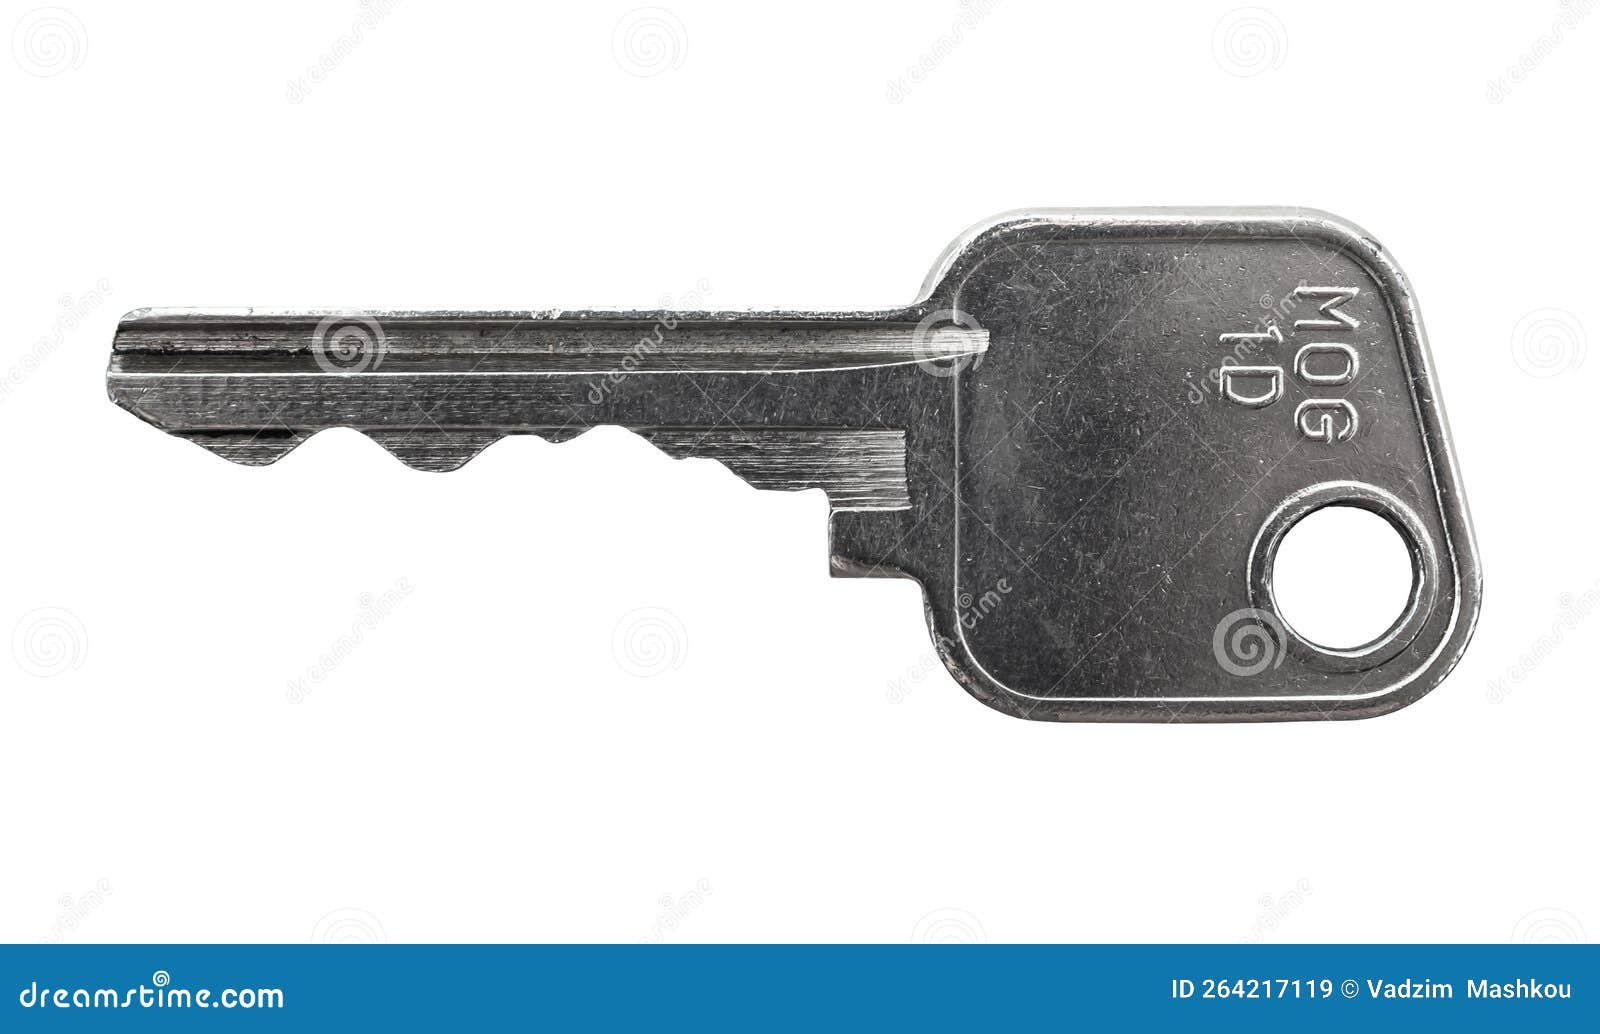 key from the door lock on a white background close-up. key isolate